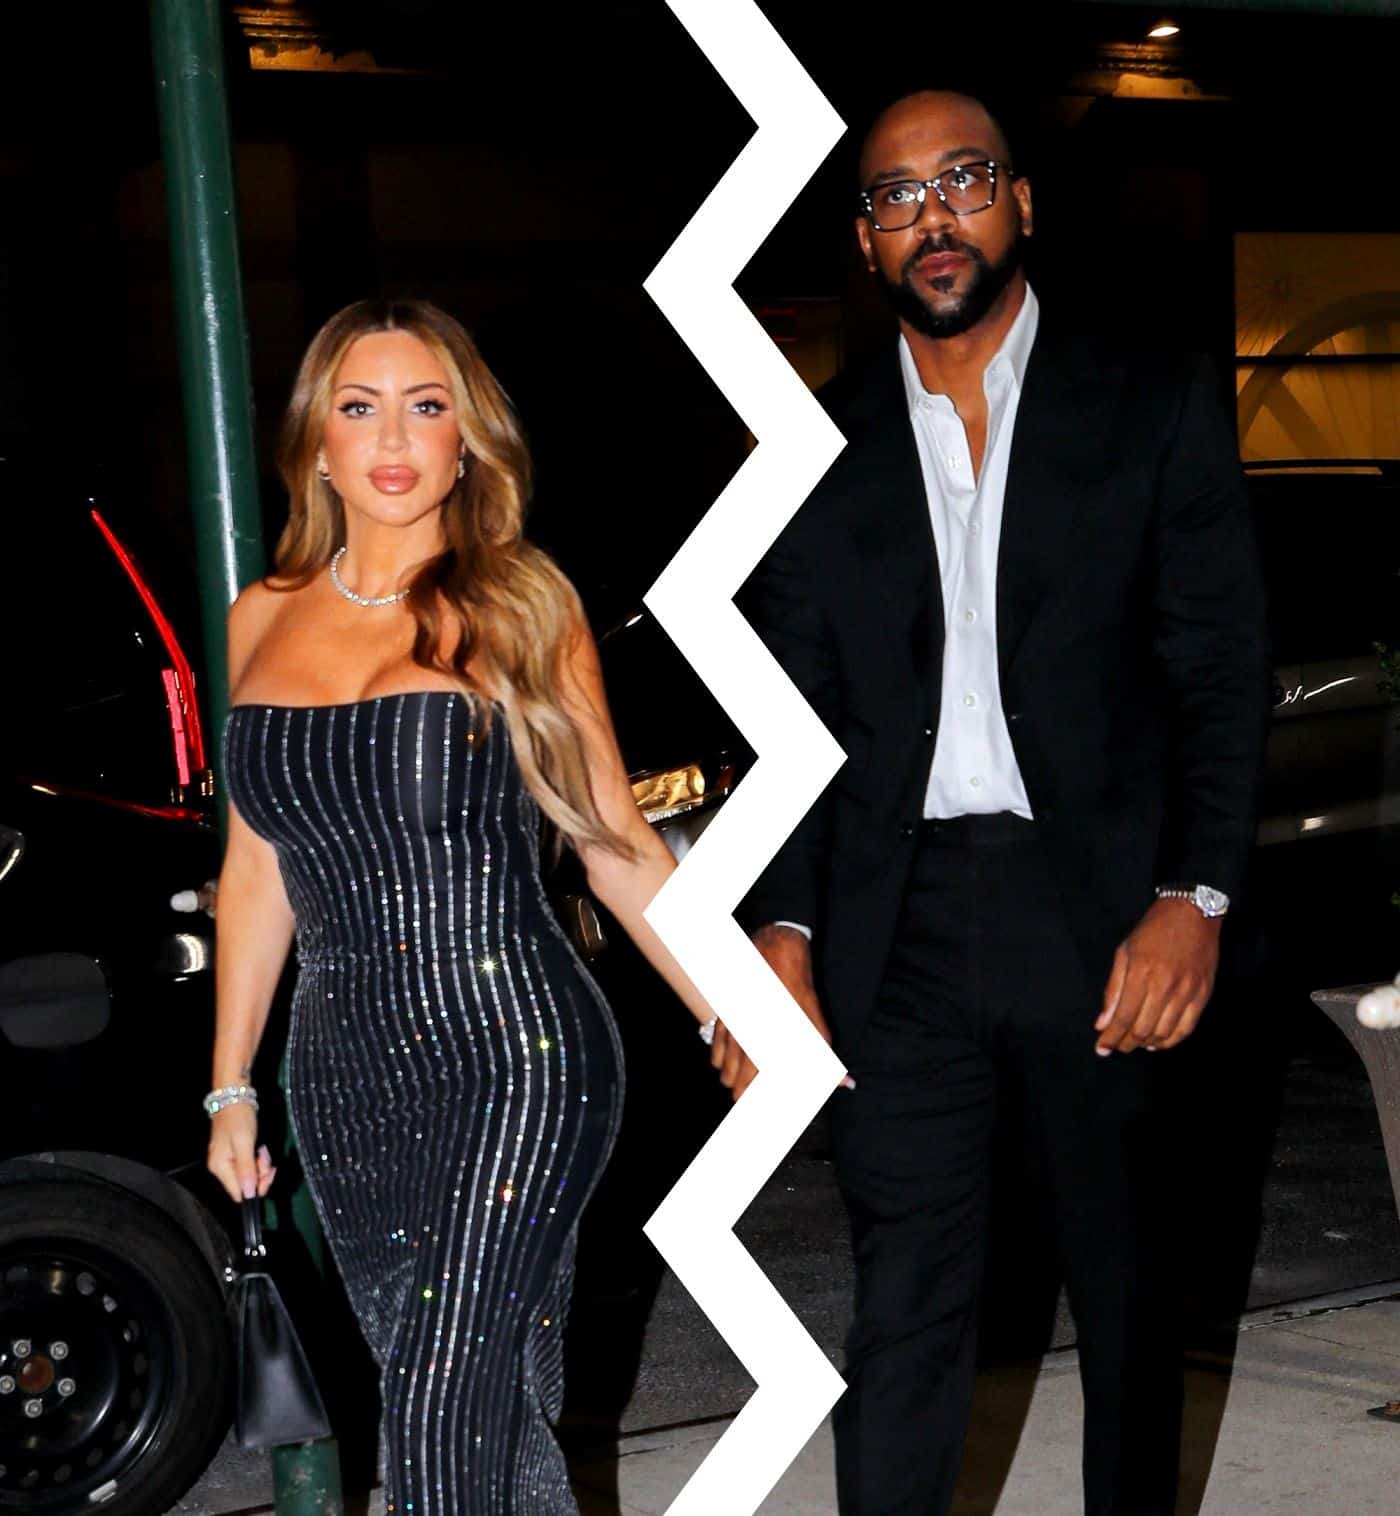 RHOM Star Larsa Pippen and Marcus Jordan's Split Confirmed as Micheal Jordan’s Disapproval and Feud With Scottie Pippen Reportedly Played a Role